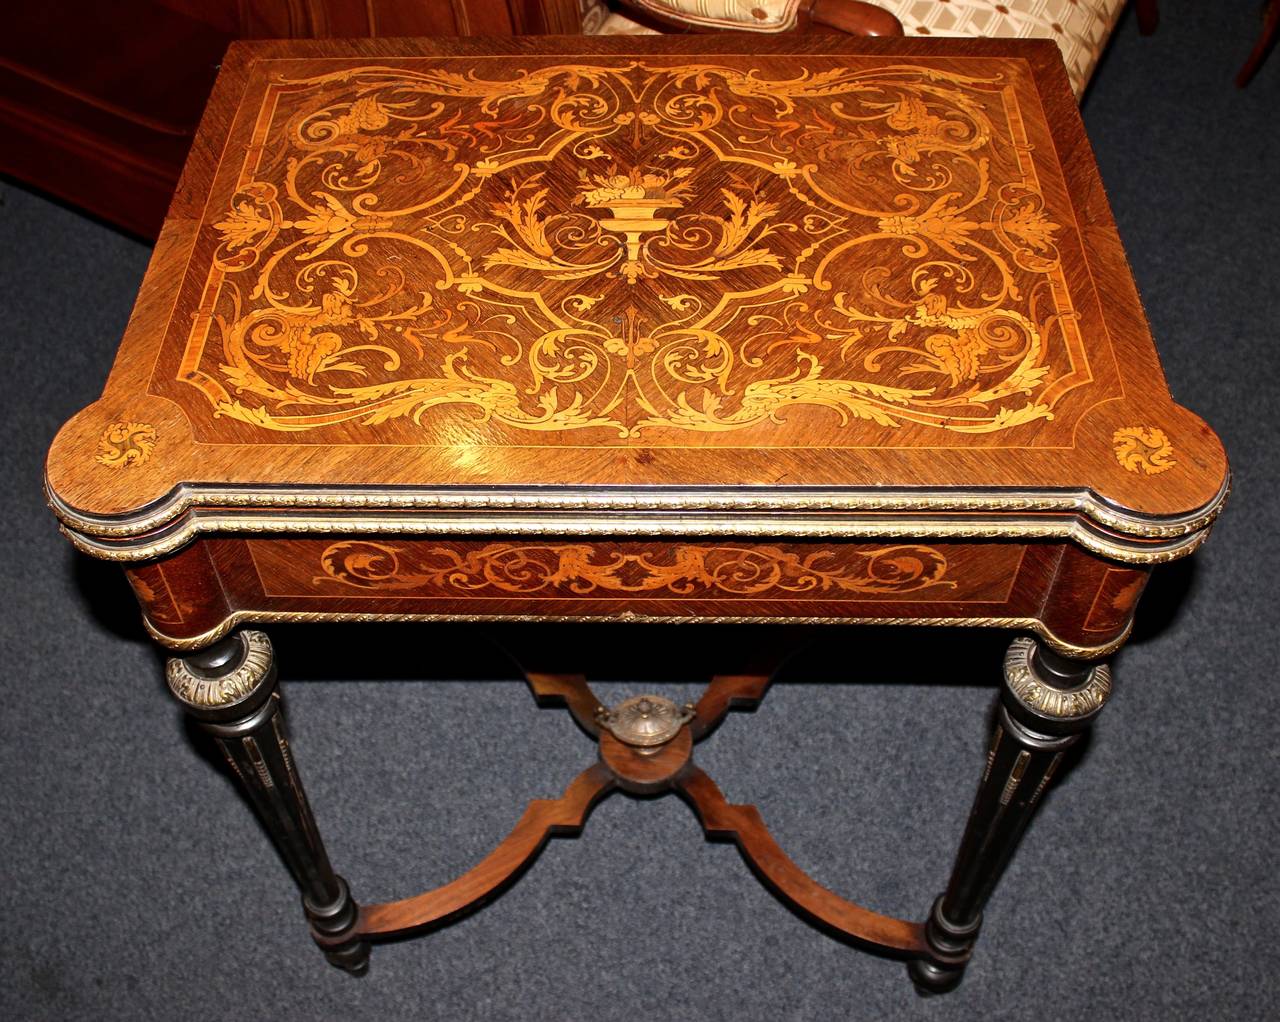 This French game table is made from walnut with gorgeous inlay work.  Extra detail includes ormolu along the sides and down the legs. The top swivels to the side and then folds open to reveal a green felt top.  This movement also reveals the storage